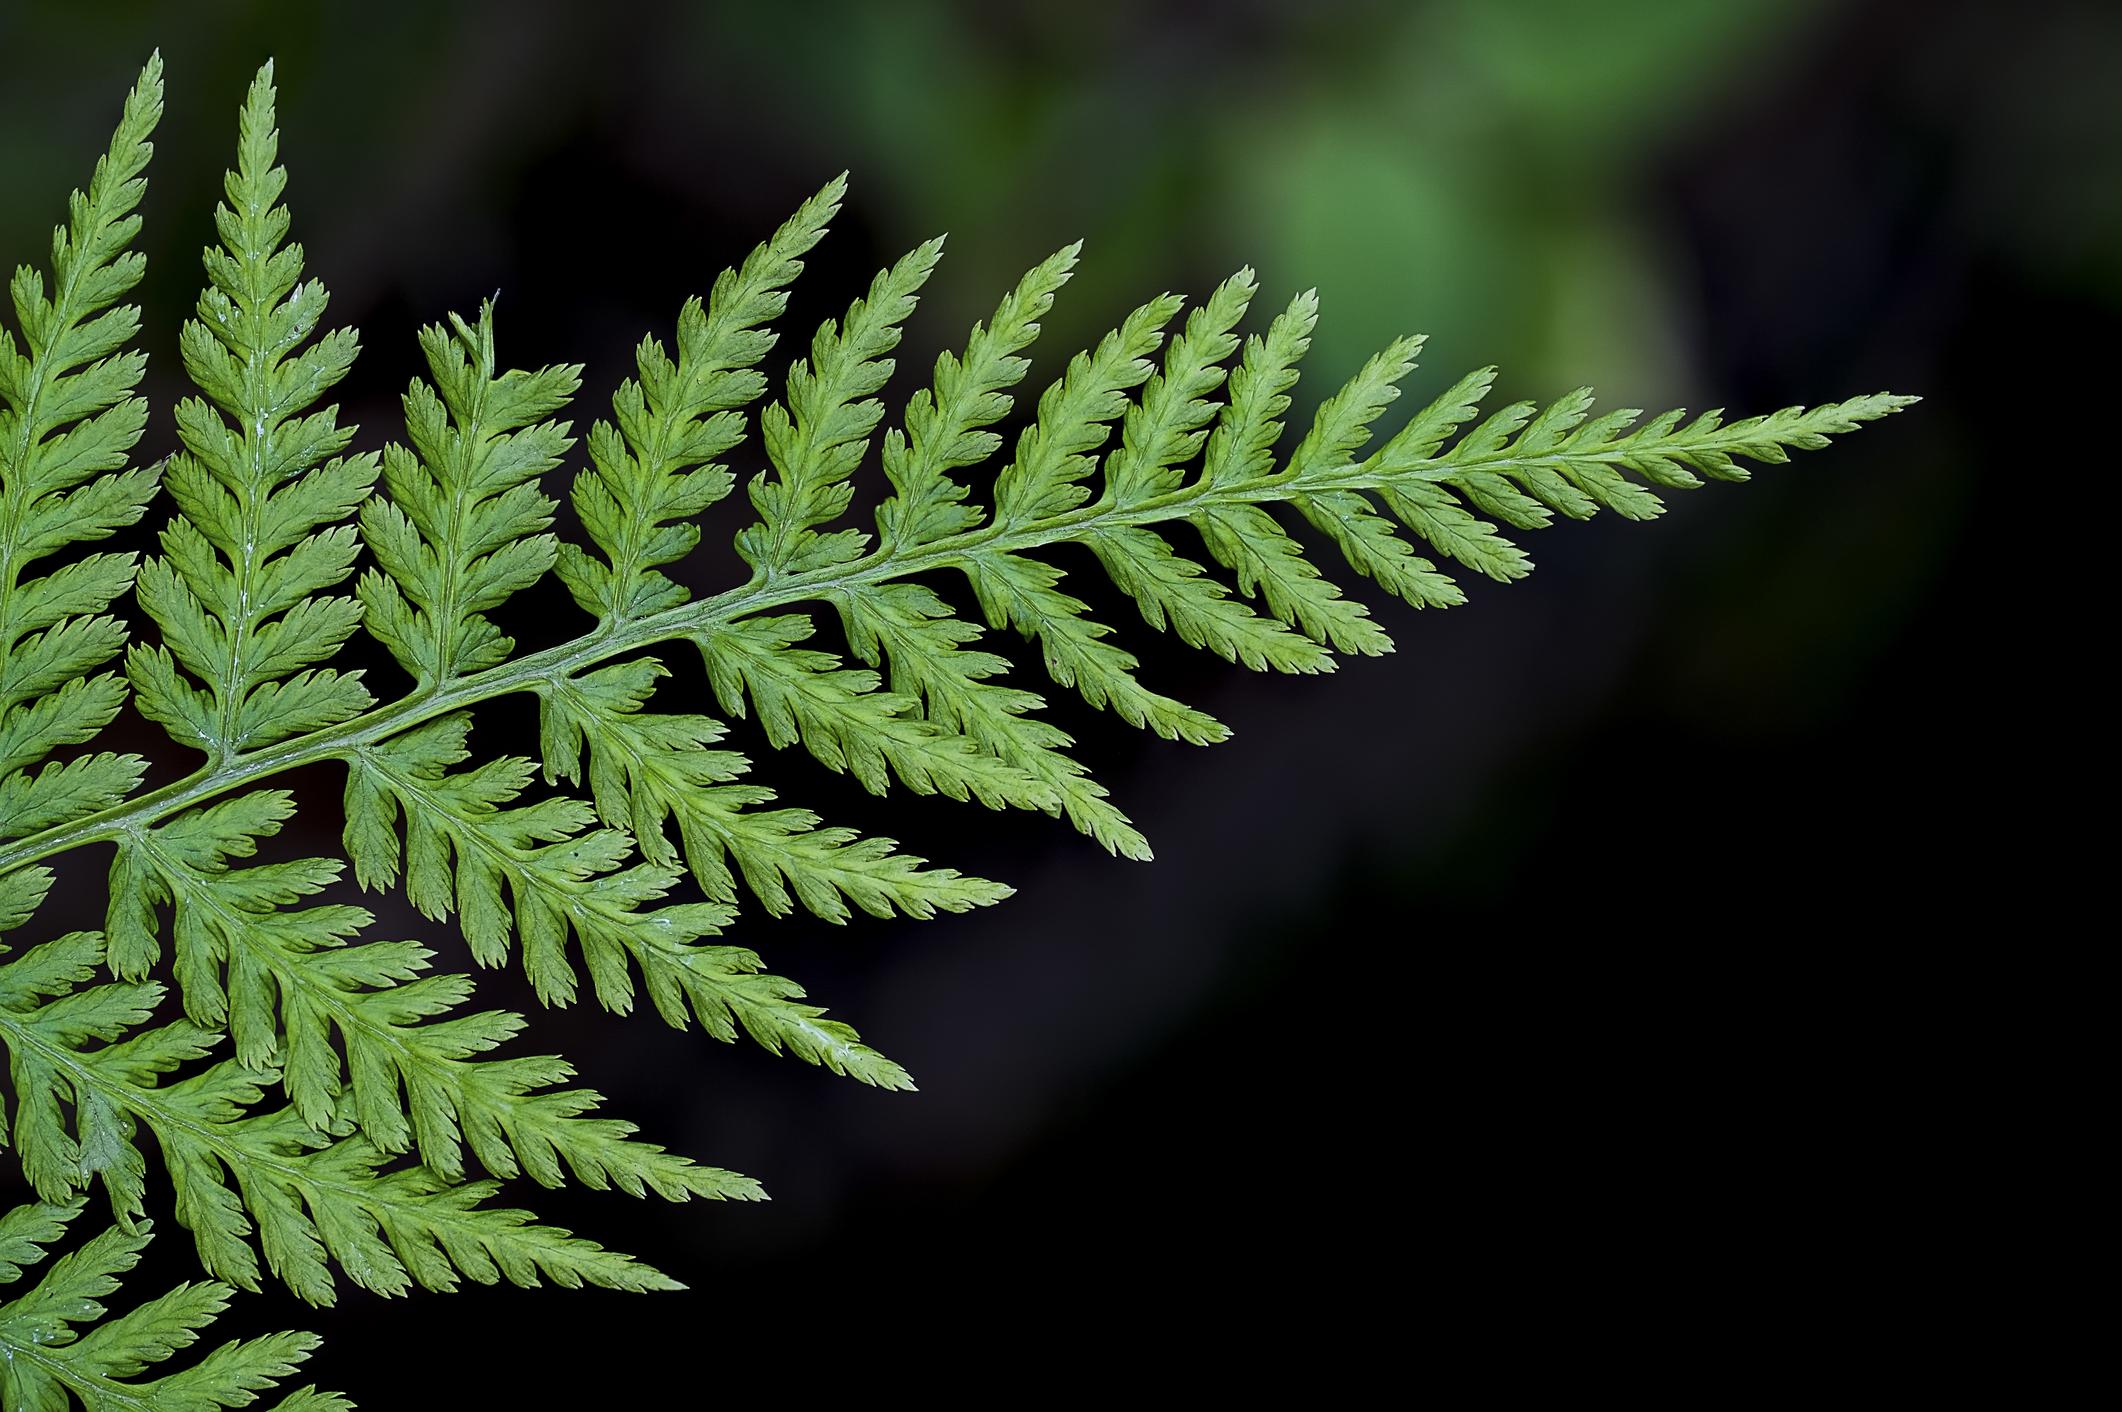 Fern leaves - difference between fern and bracken